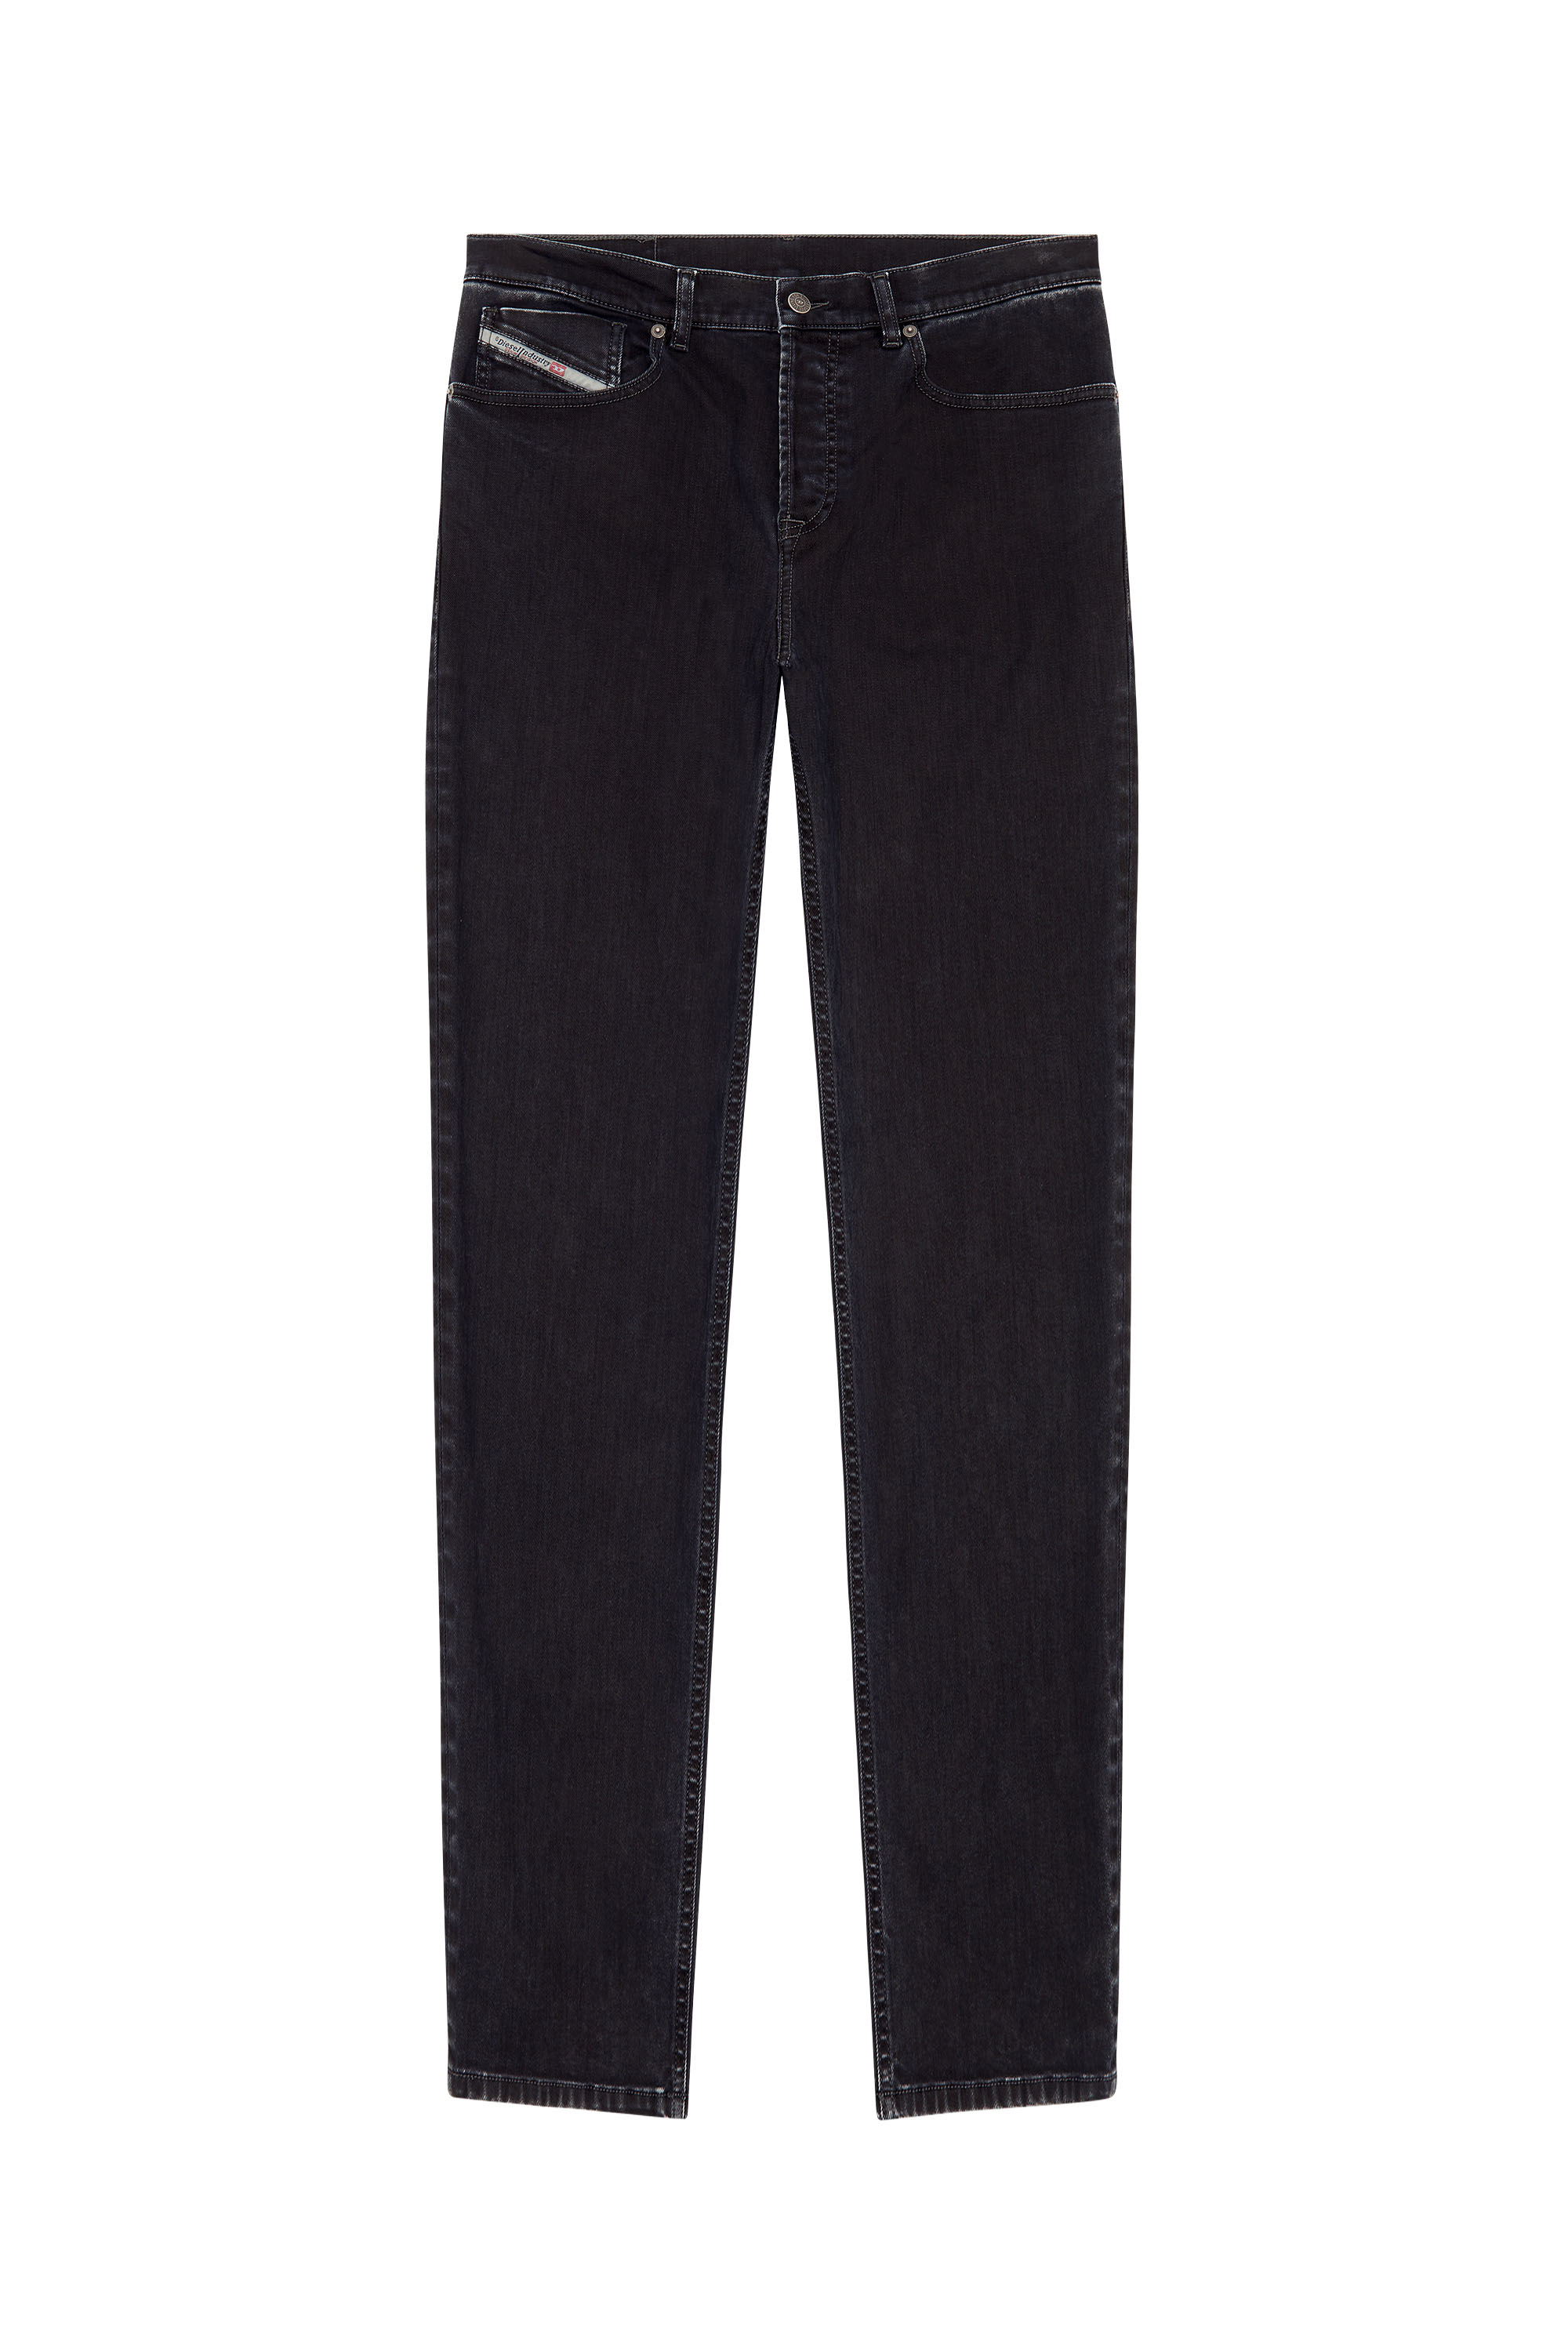 2005 D-FINING 0IHAO Tapered Jeans, Black/Dark grey - Jeans